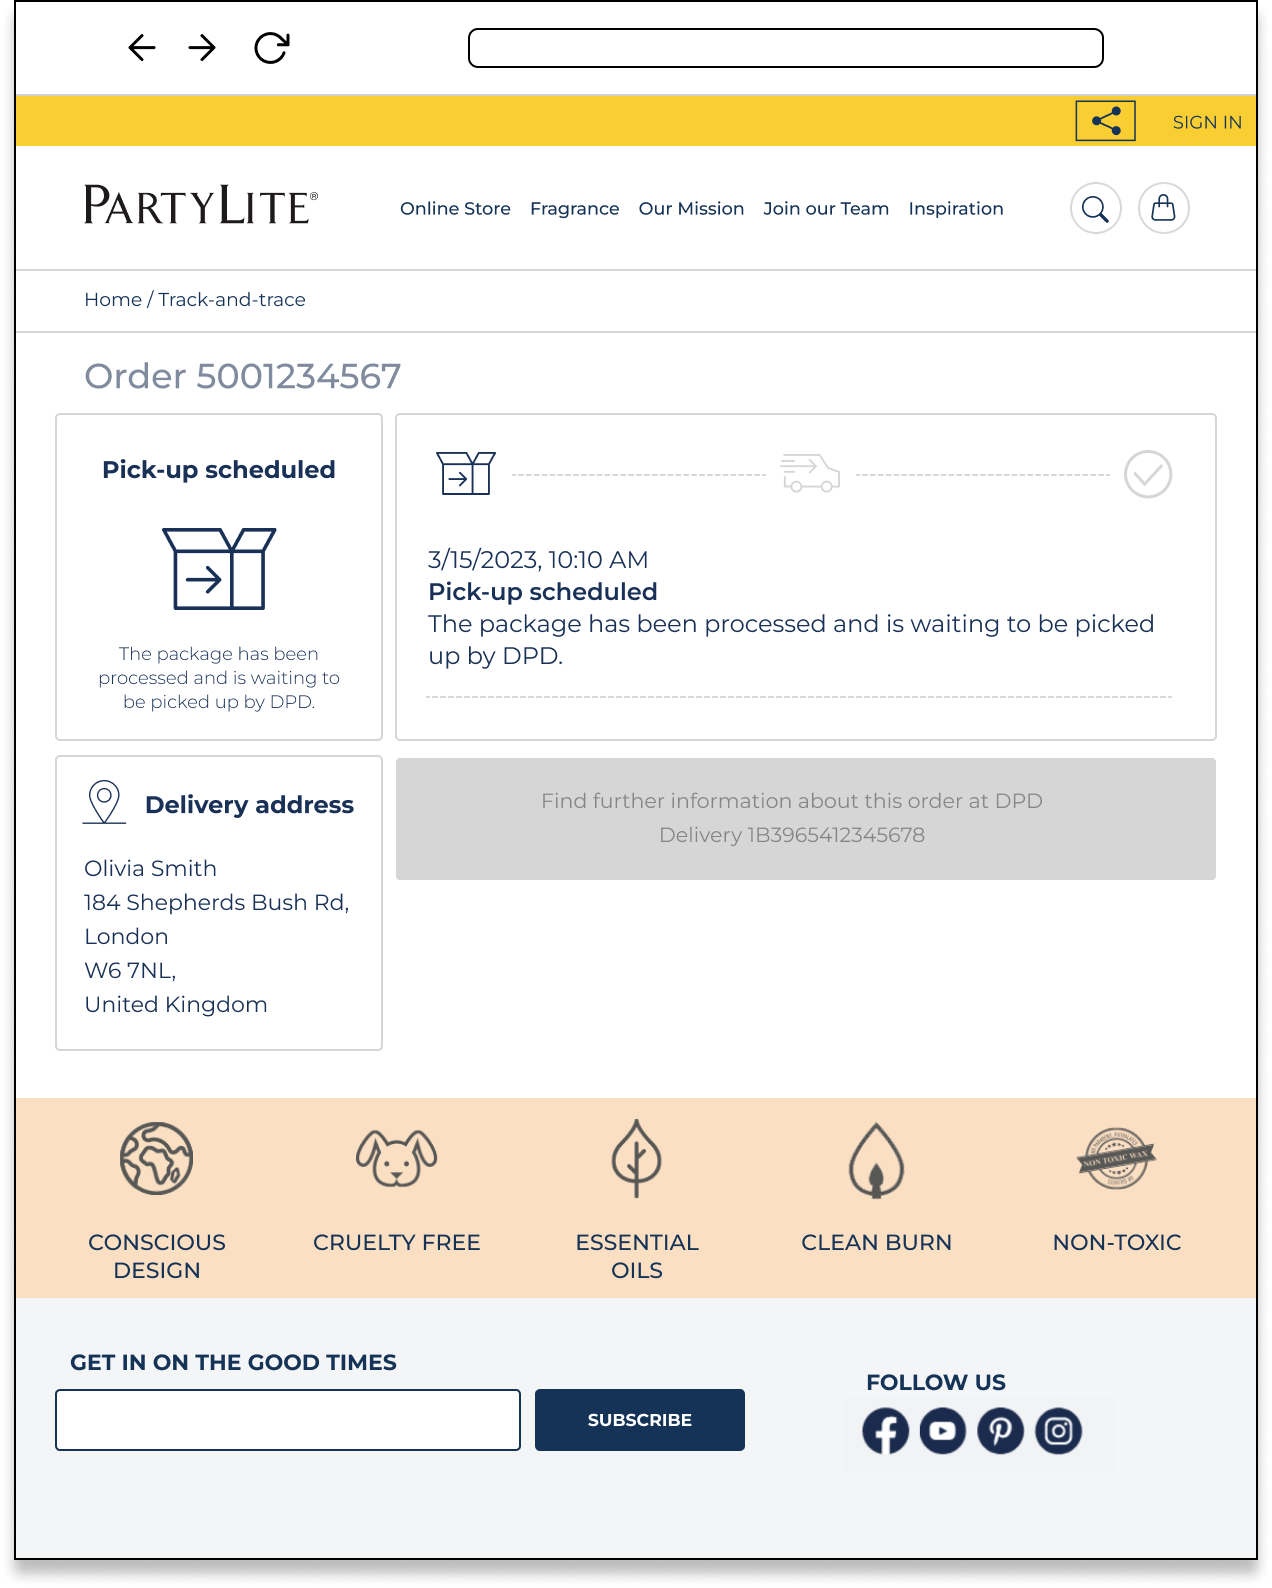 PartyLite order tracking page